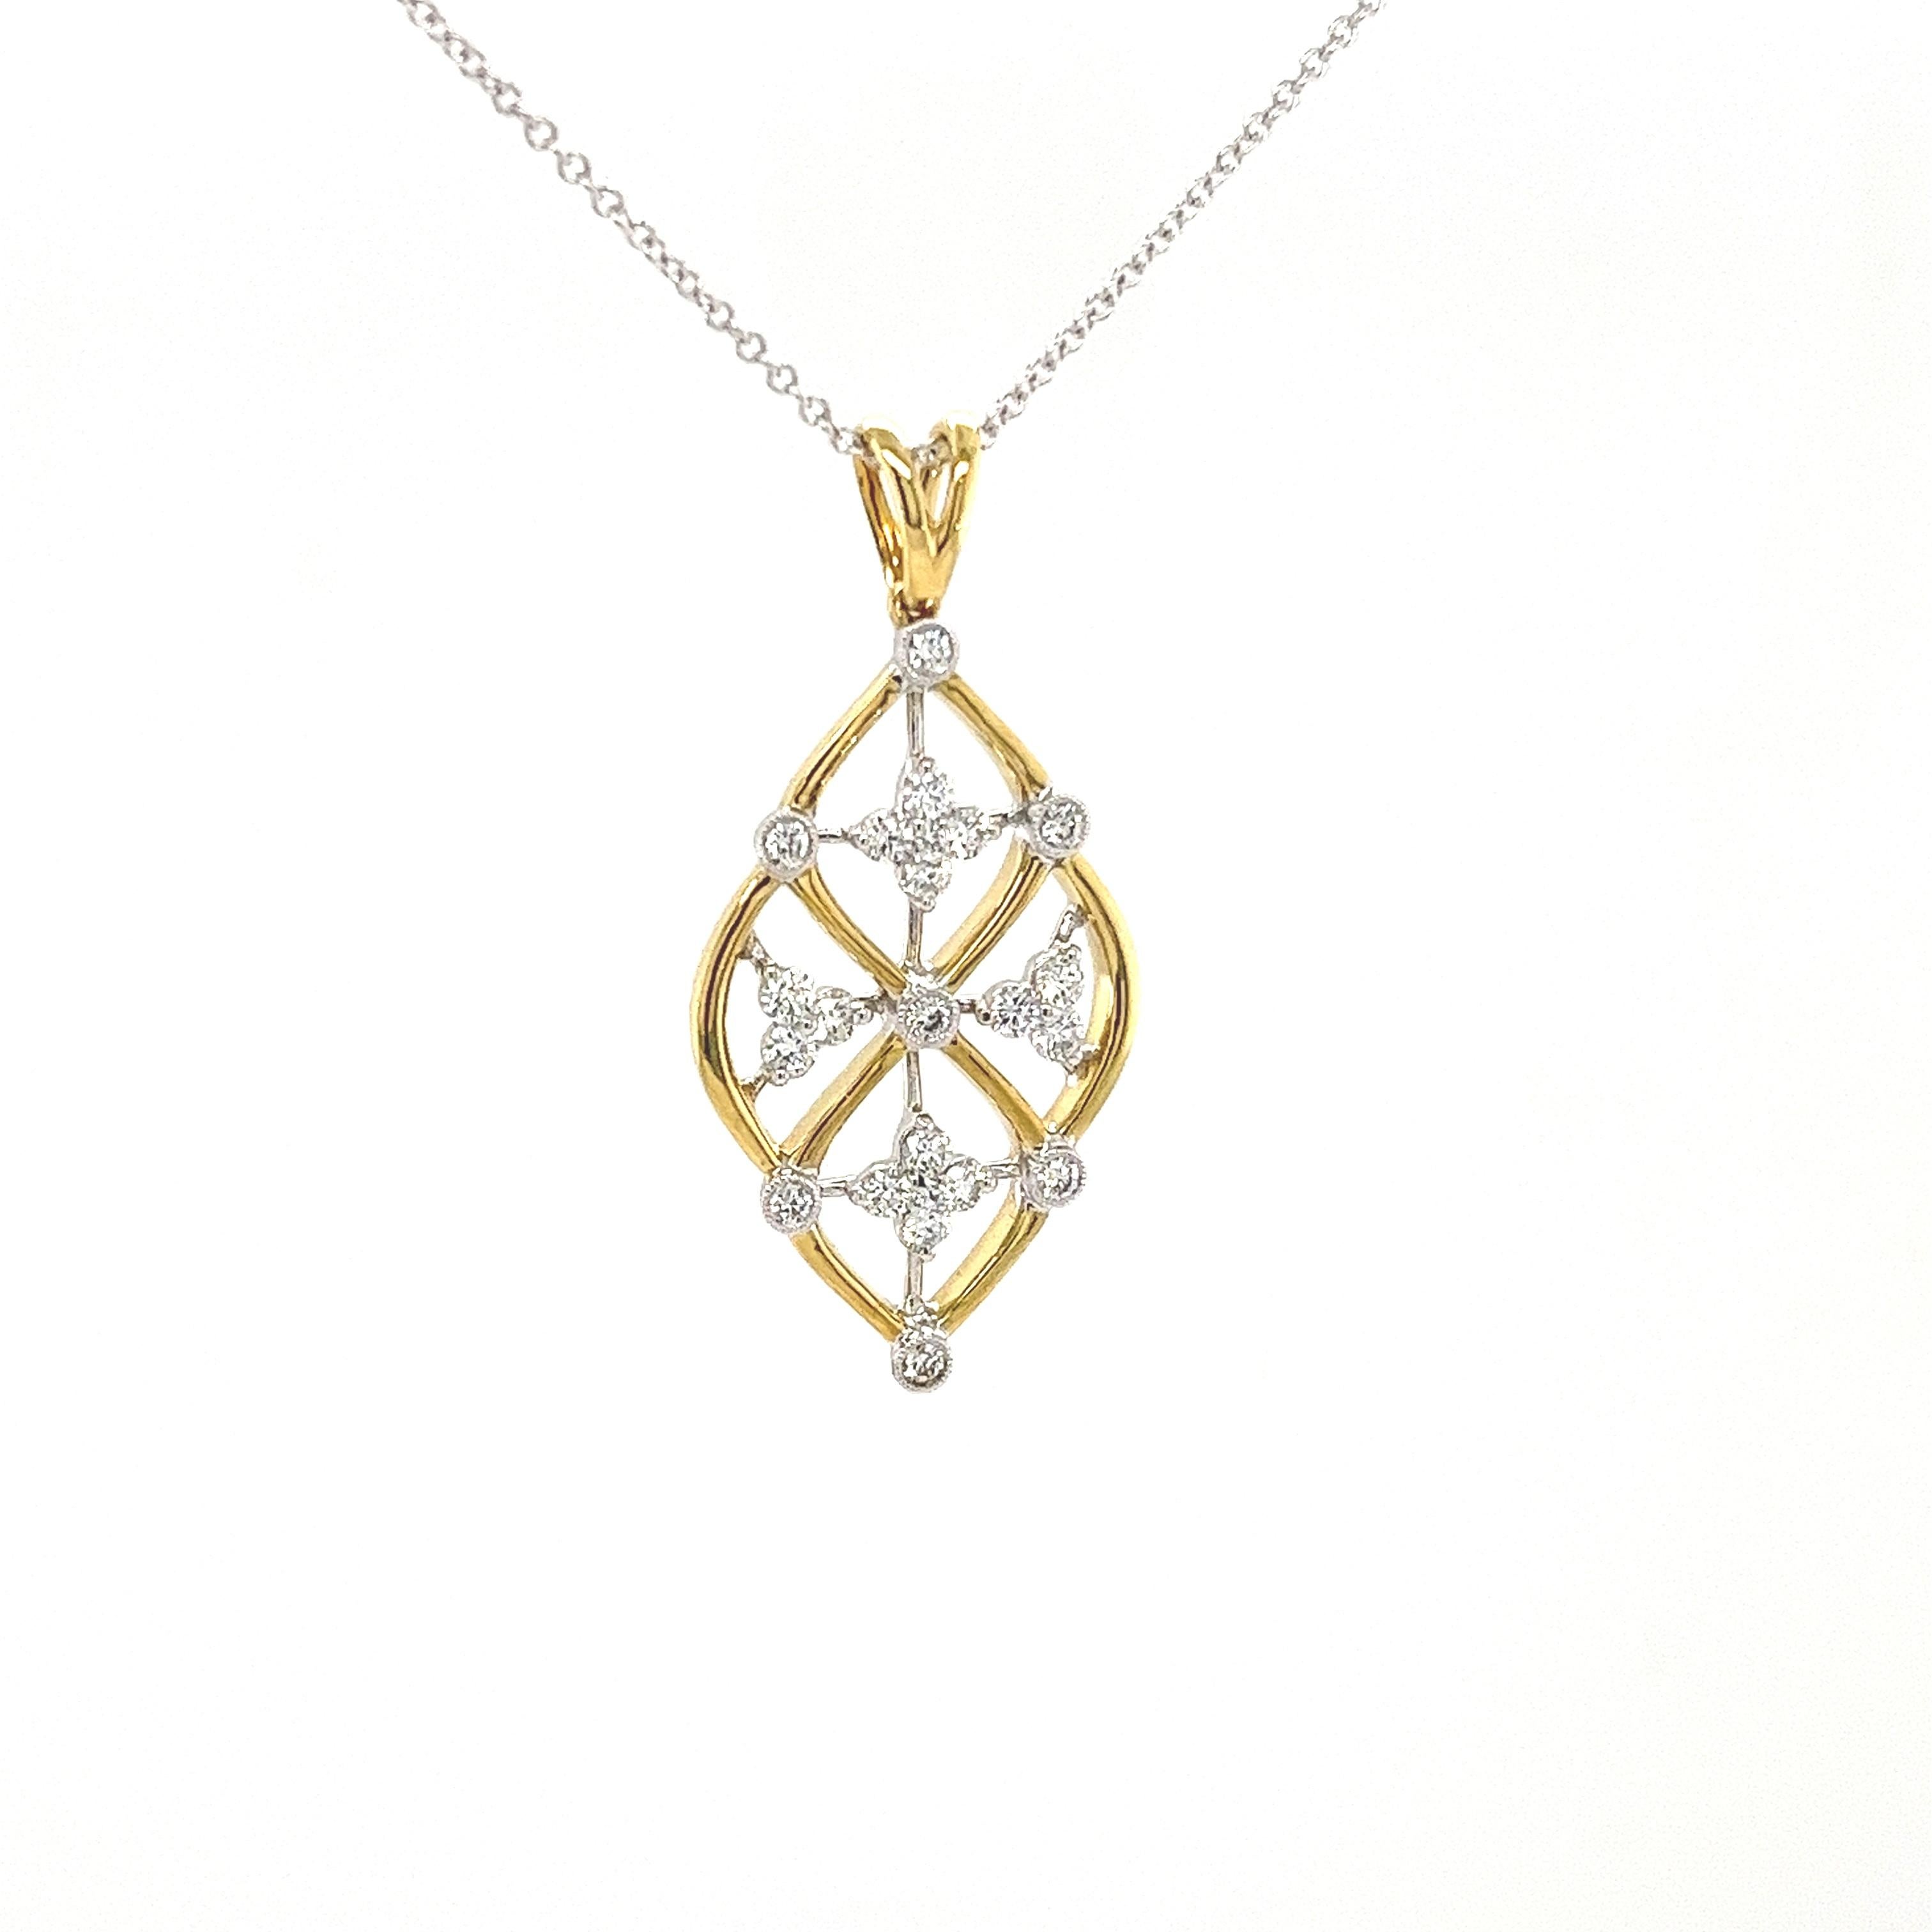 Simon G. 18K Yellow & White Two-Tone Gold Diamond Pendant Featuring Round White Cut Diamonds Weighing 0.44 Carats Total Weight Set in a Lacework Design on an Adjustable 17